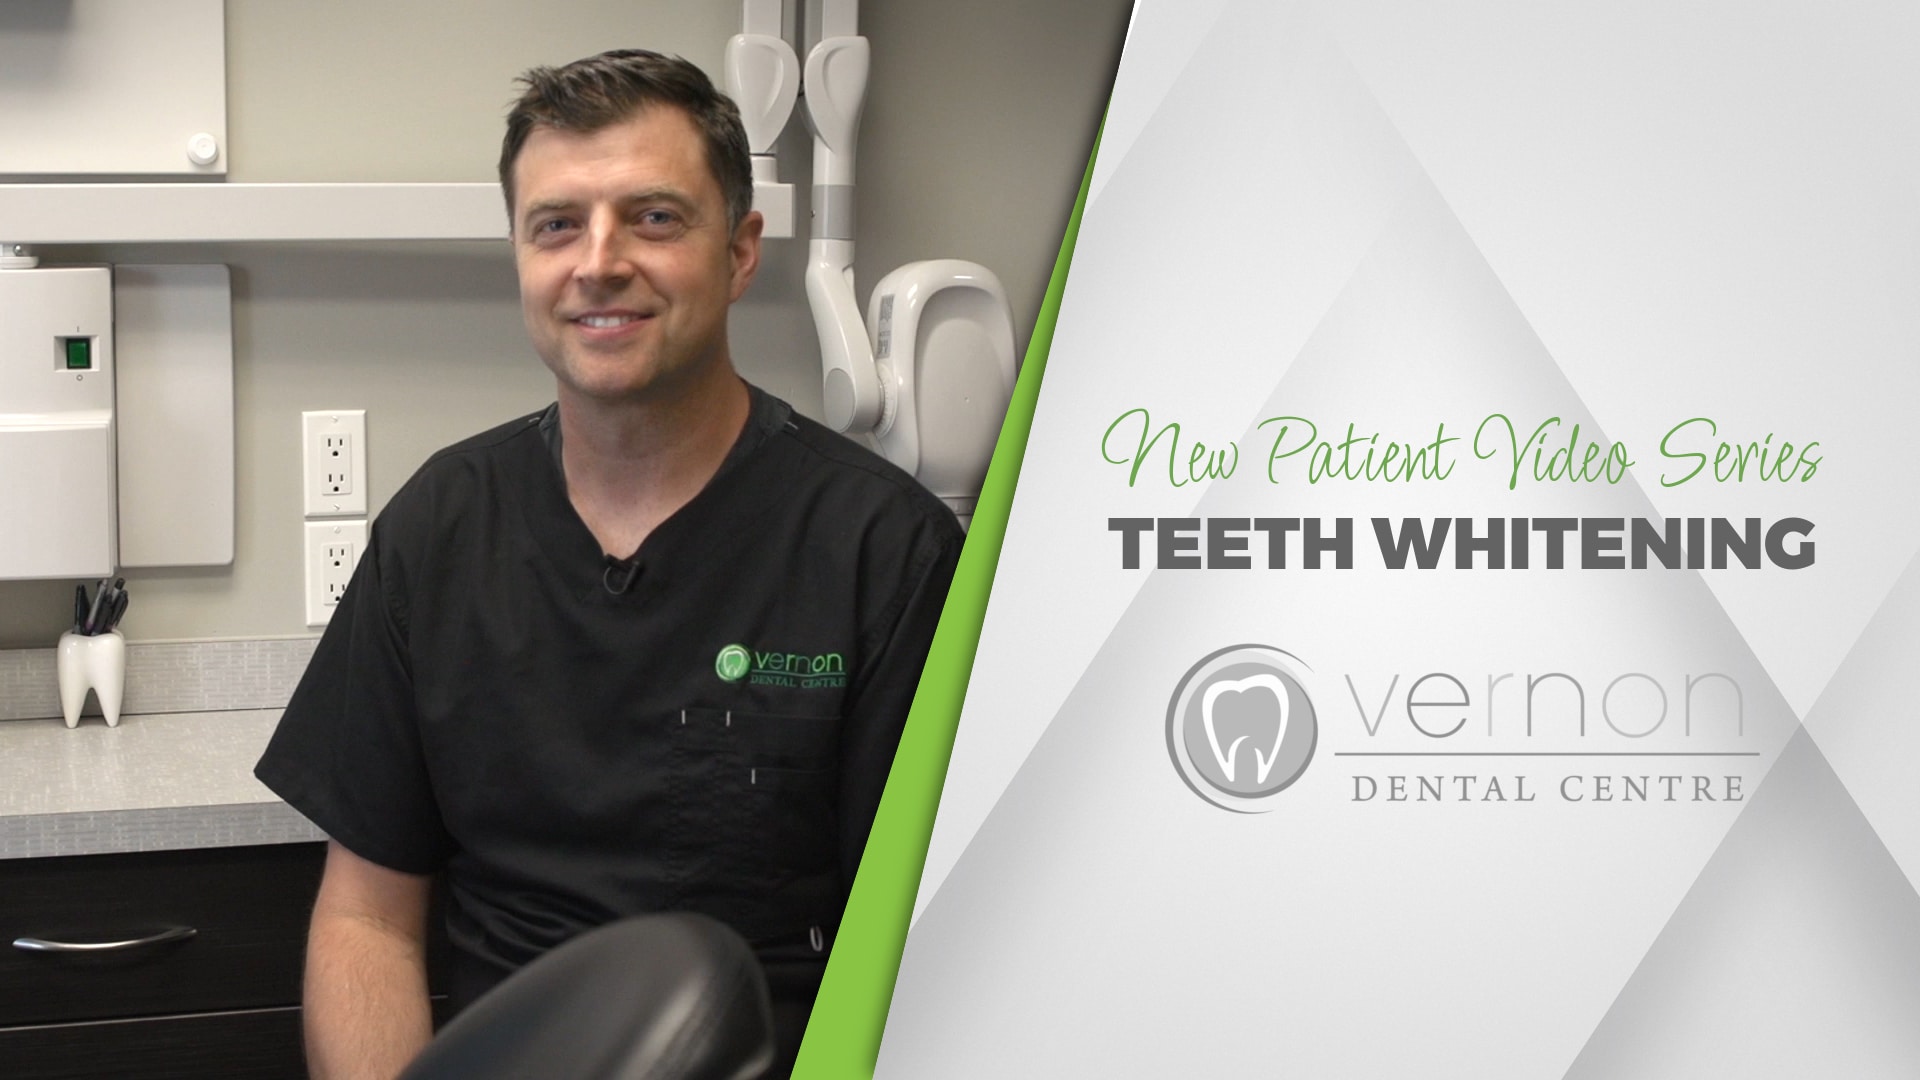 Dr. Anthony Berdan from Vernon Dental Centre discusses teeth whitening